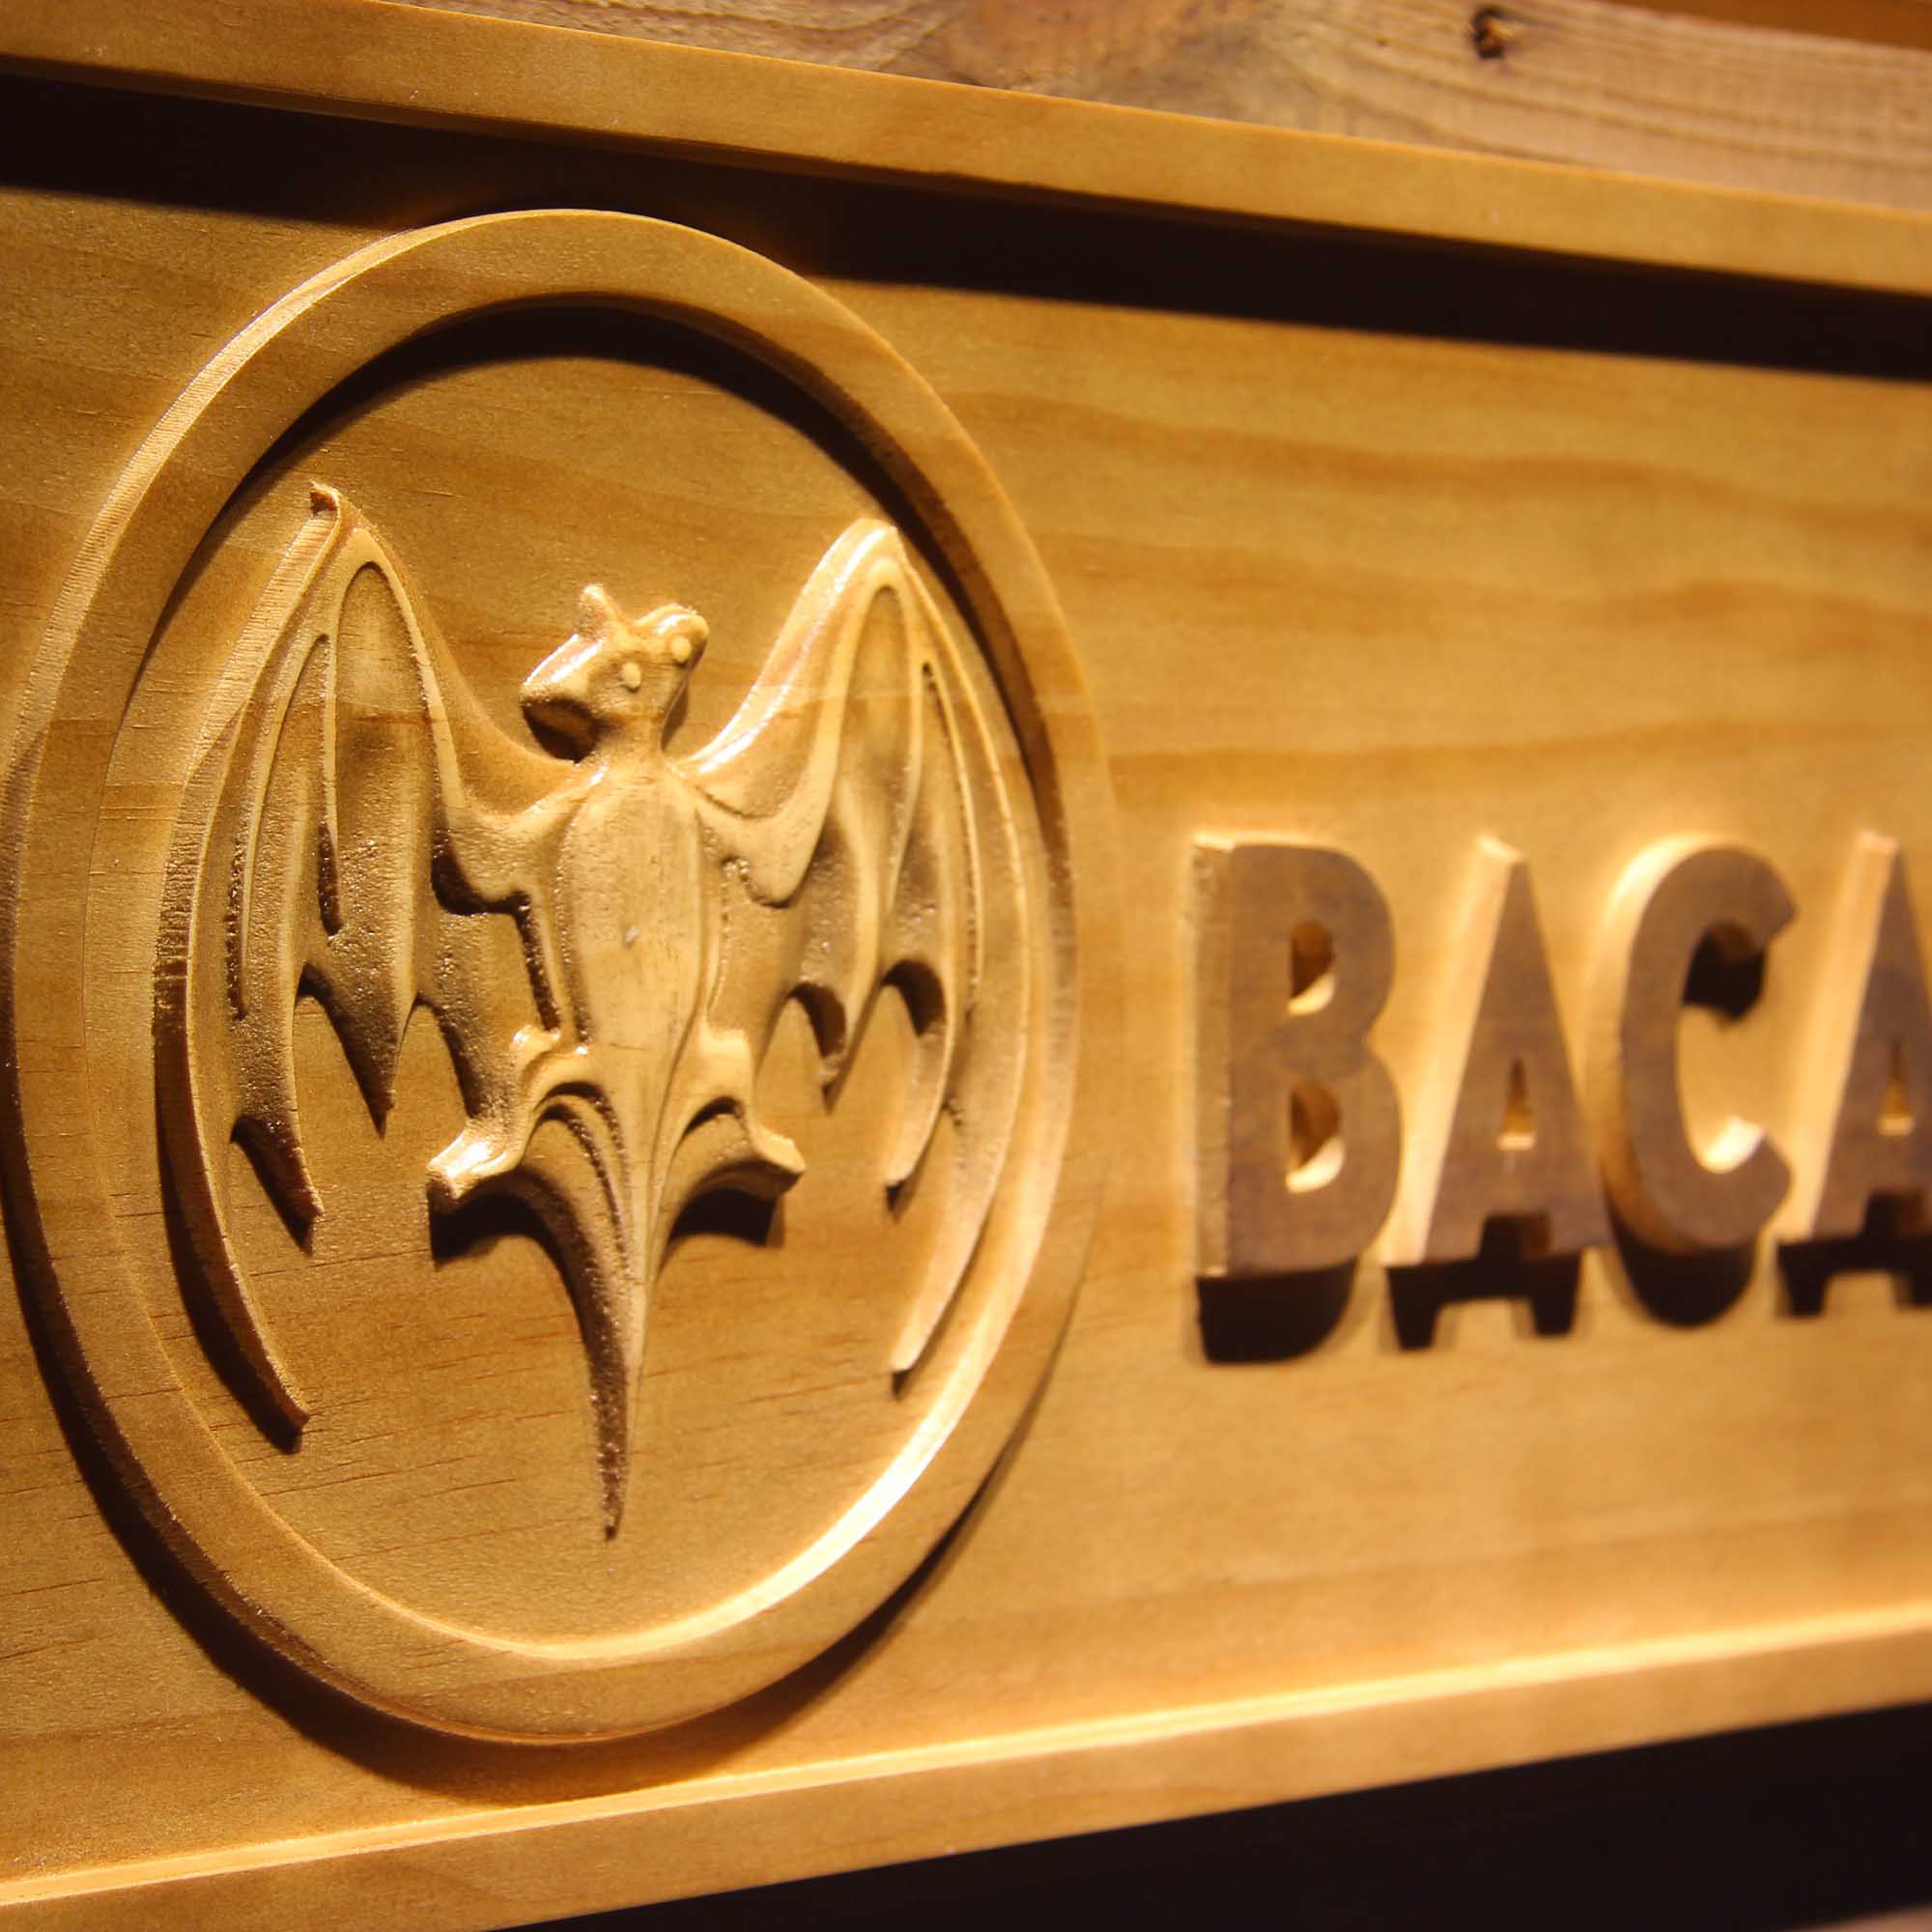 Bacardi Rum Wine 3D Wooden Engrave Sign